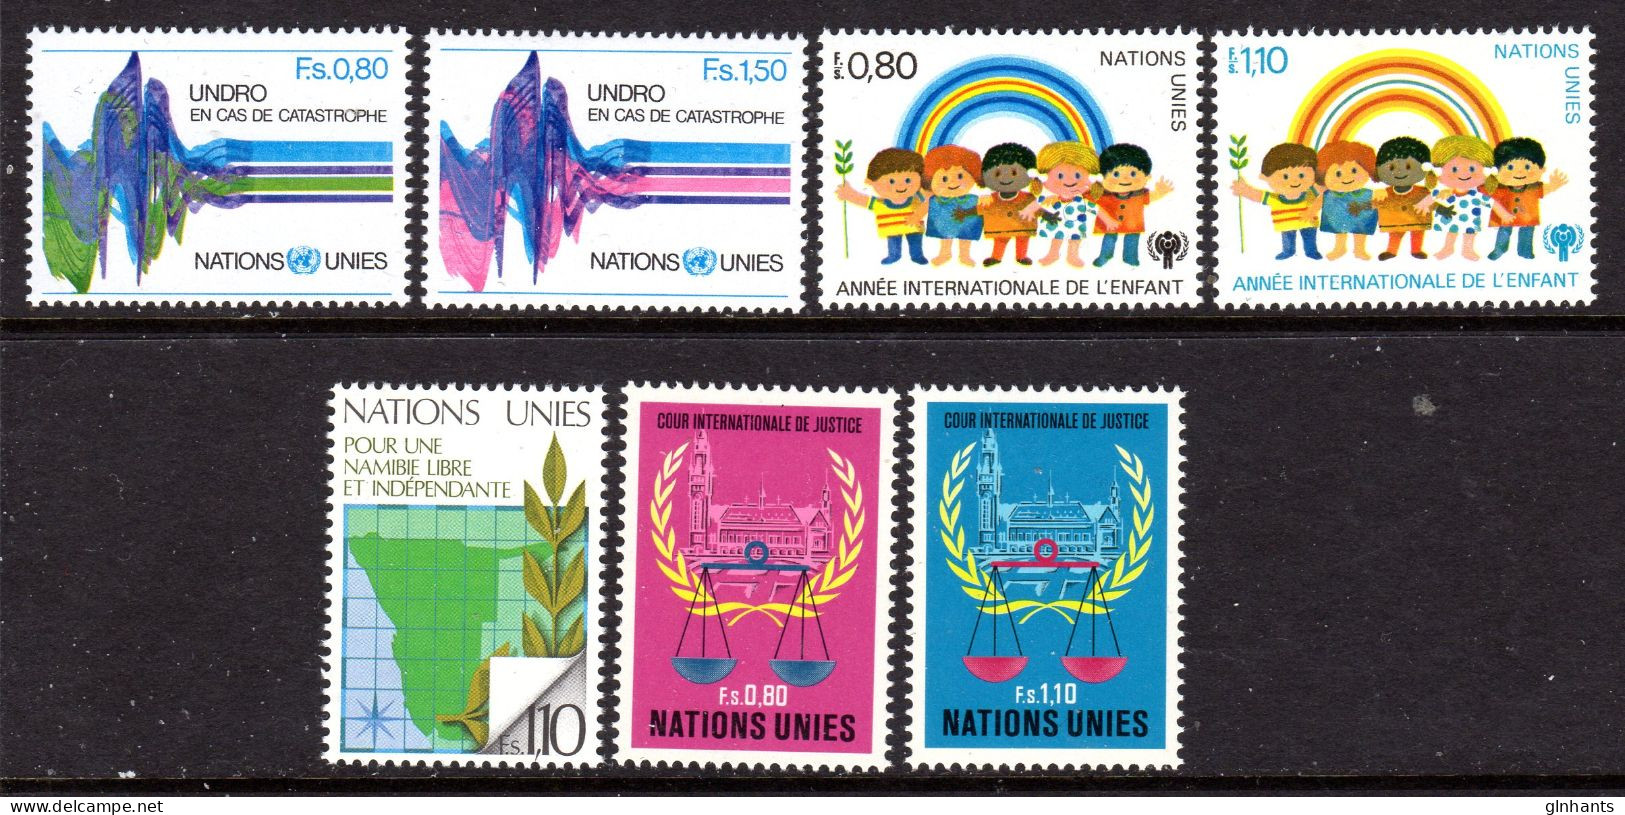 UNITED NATIONS UN GENEVA - 1979 COMPLETE YEAR SET (7V) AS PICTURED FINE MNH ** SG G82-G88 - Nuevos